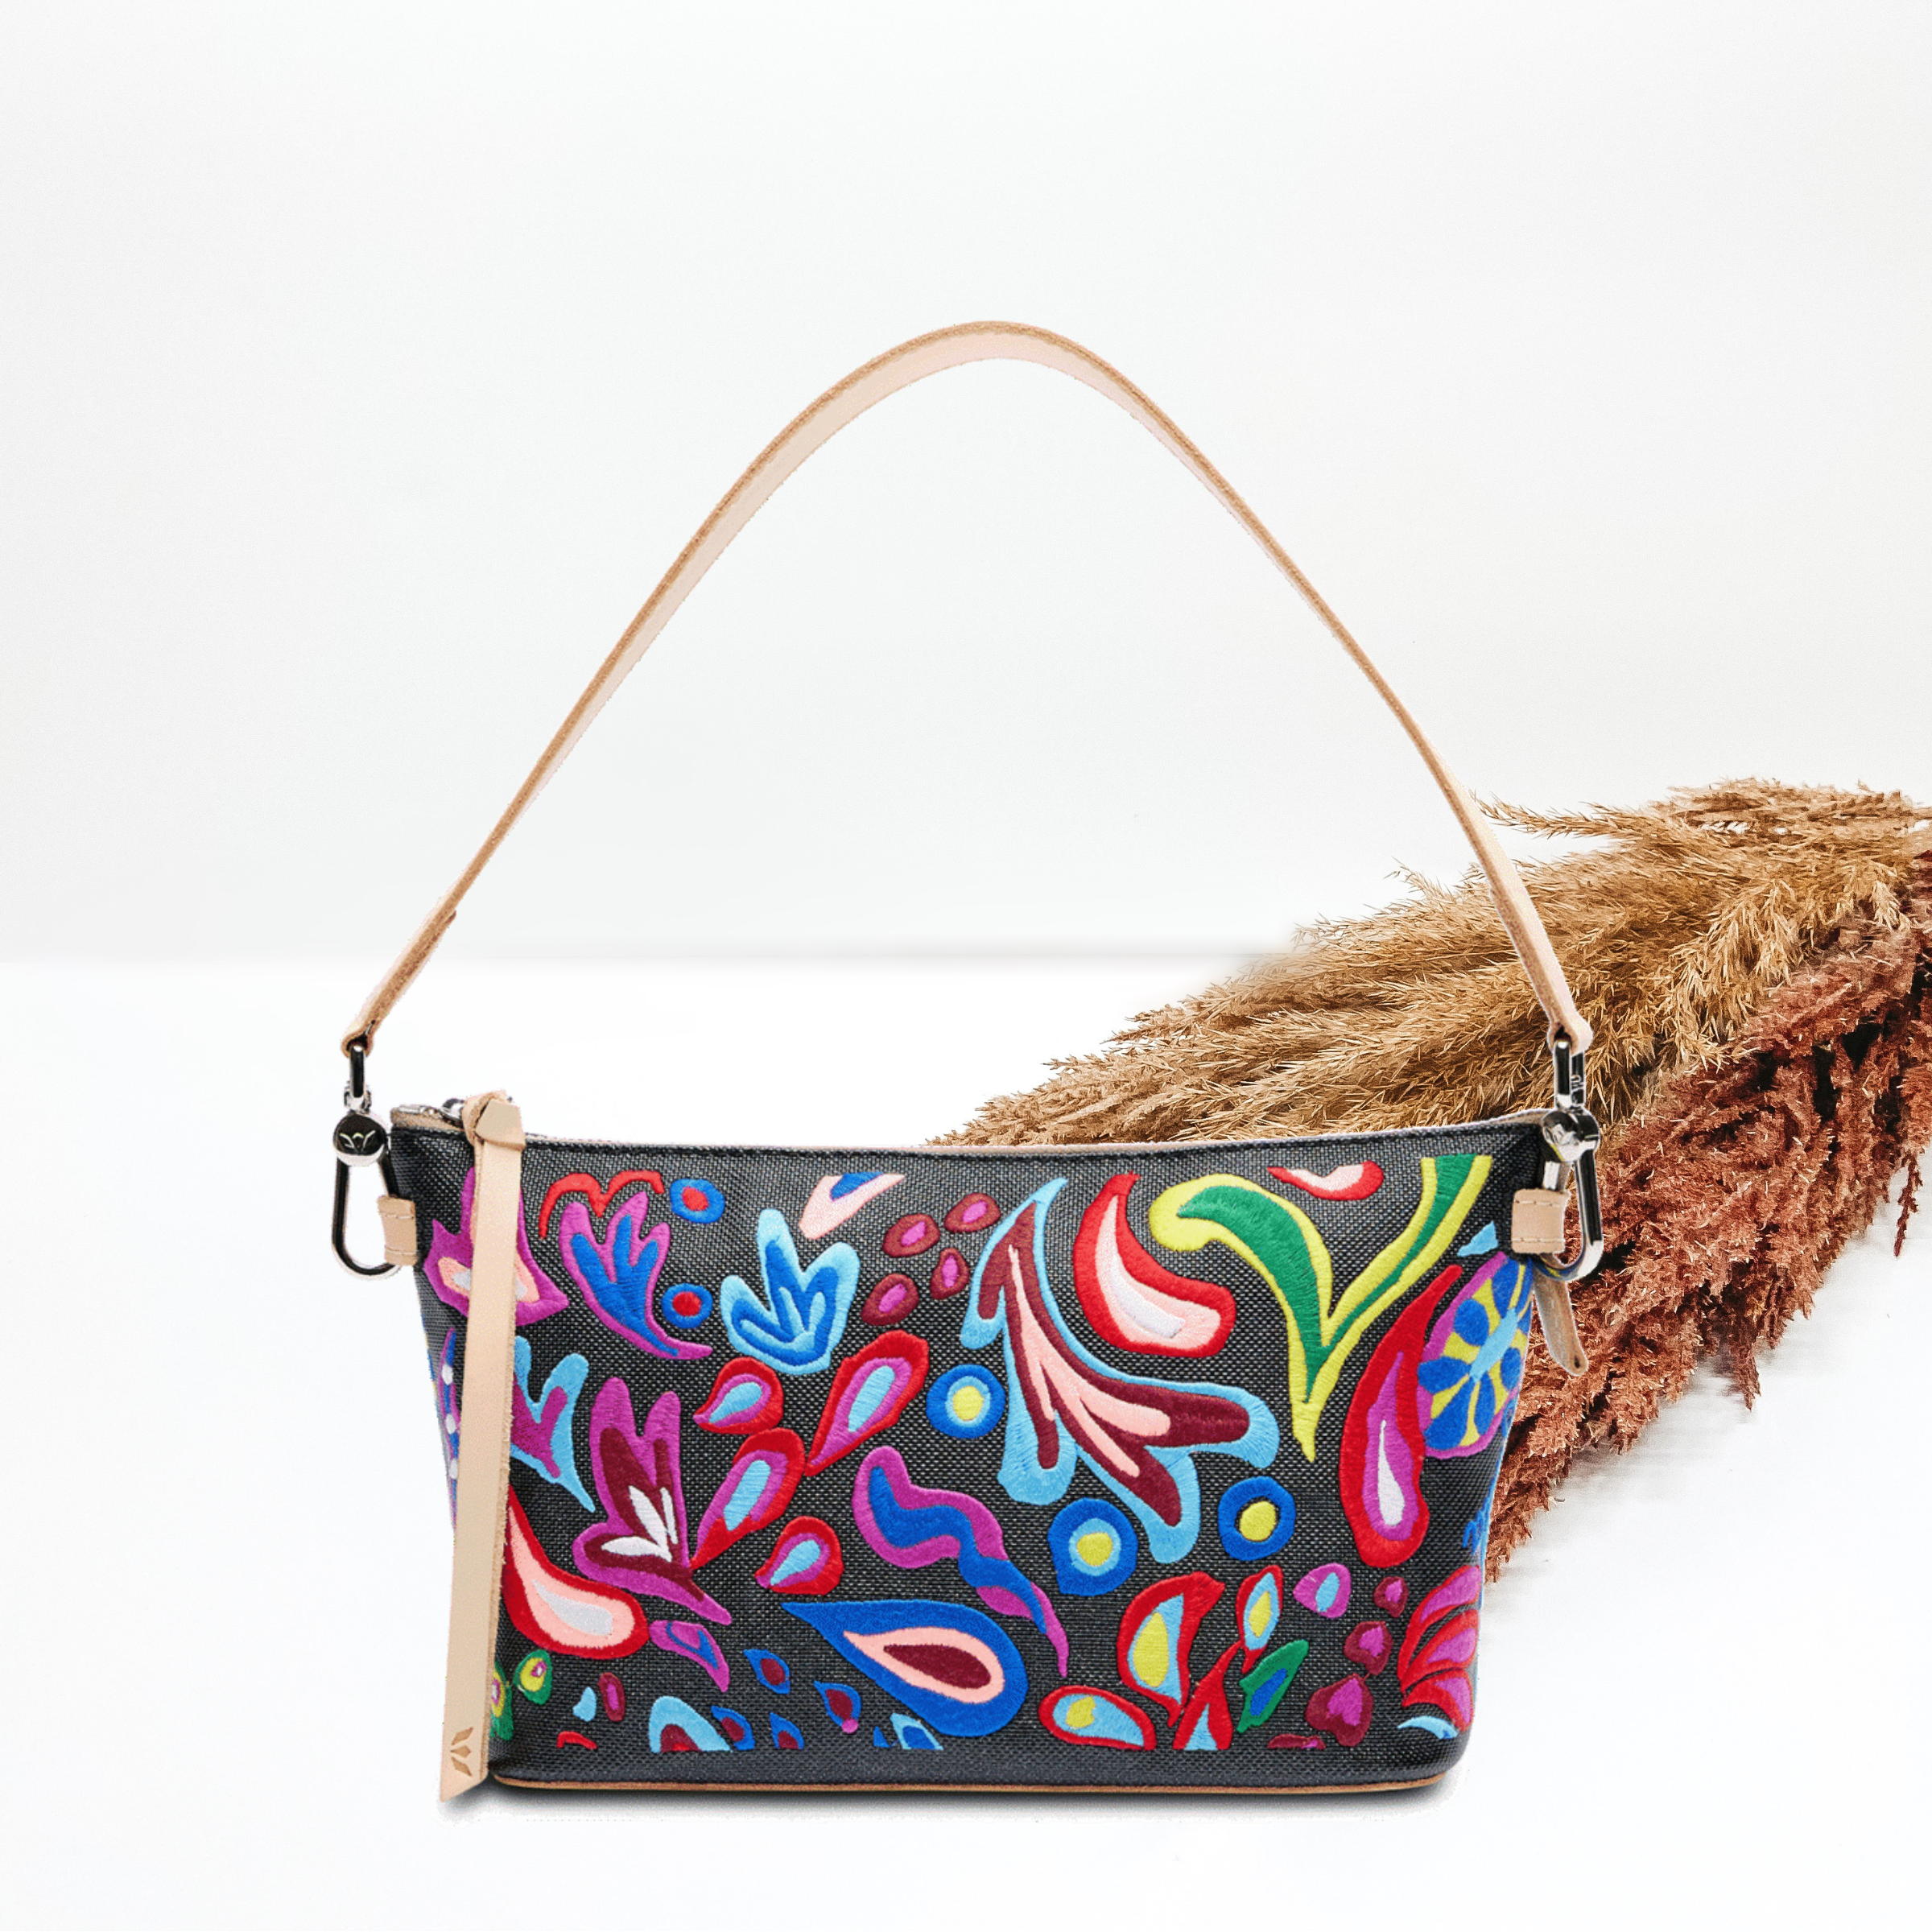 Shop Consuela Handbags, Totes, and Accessories at Giddy Up Glamour